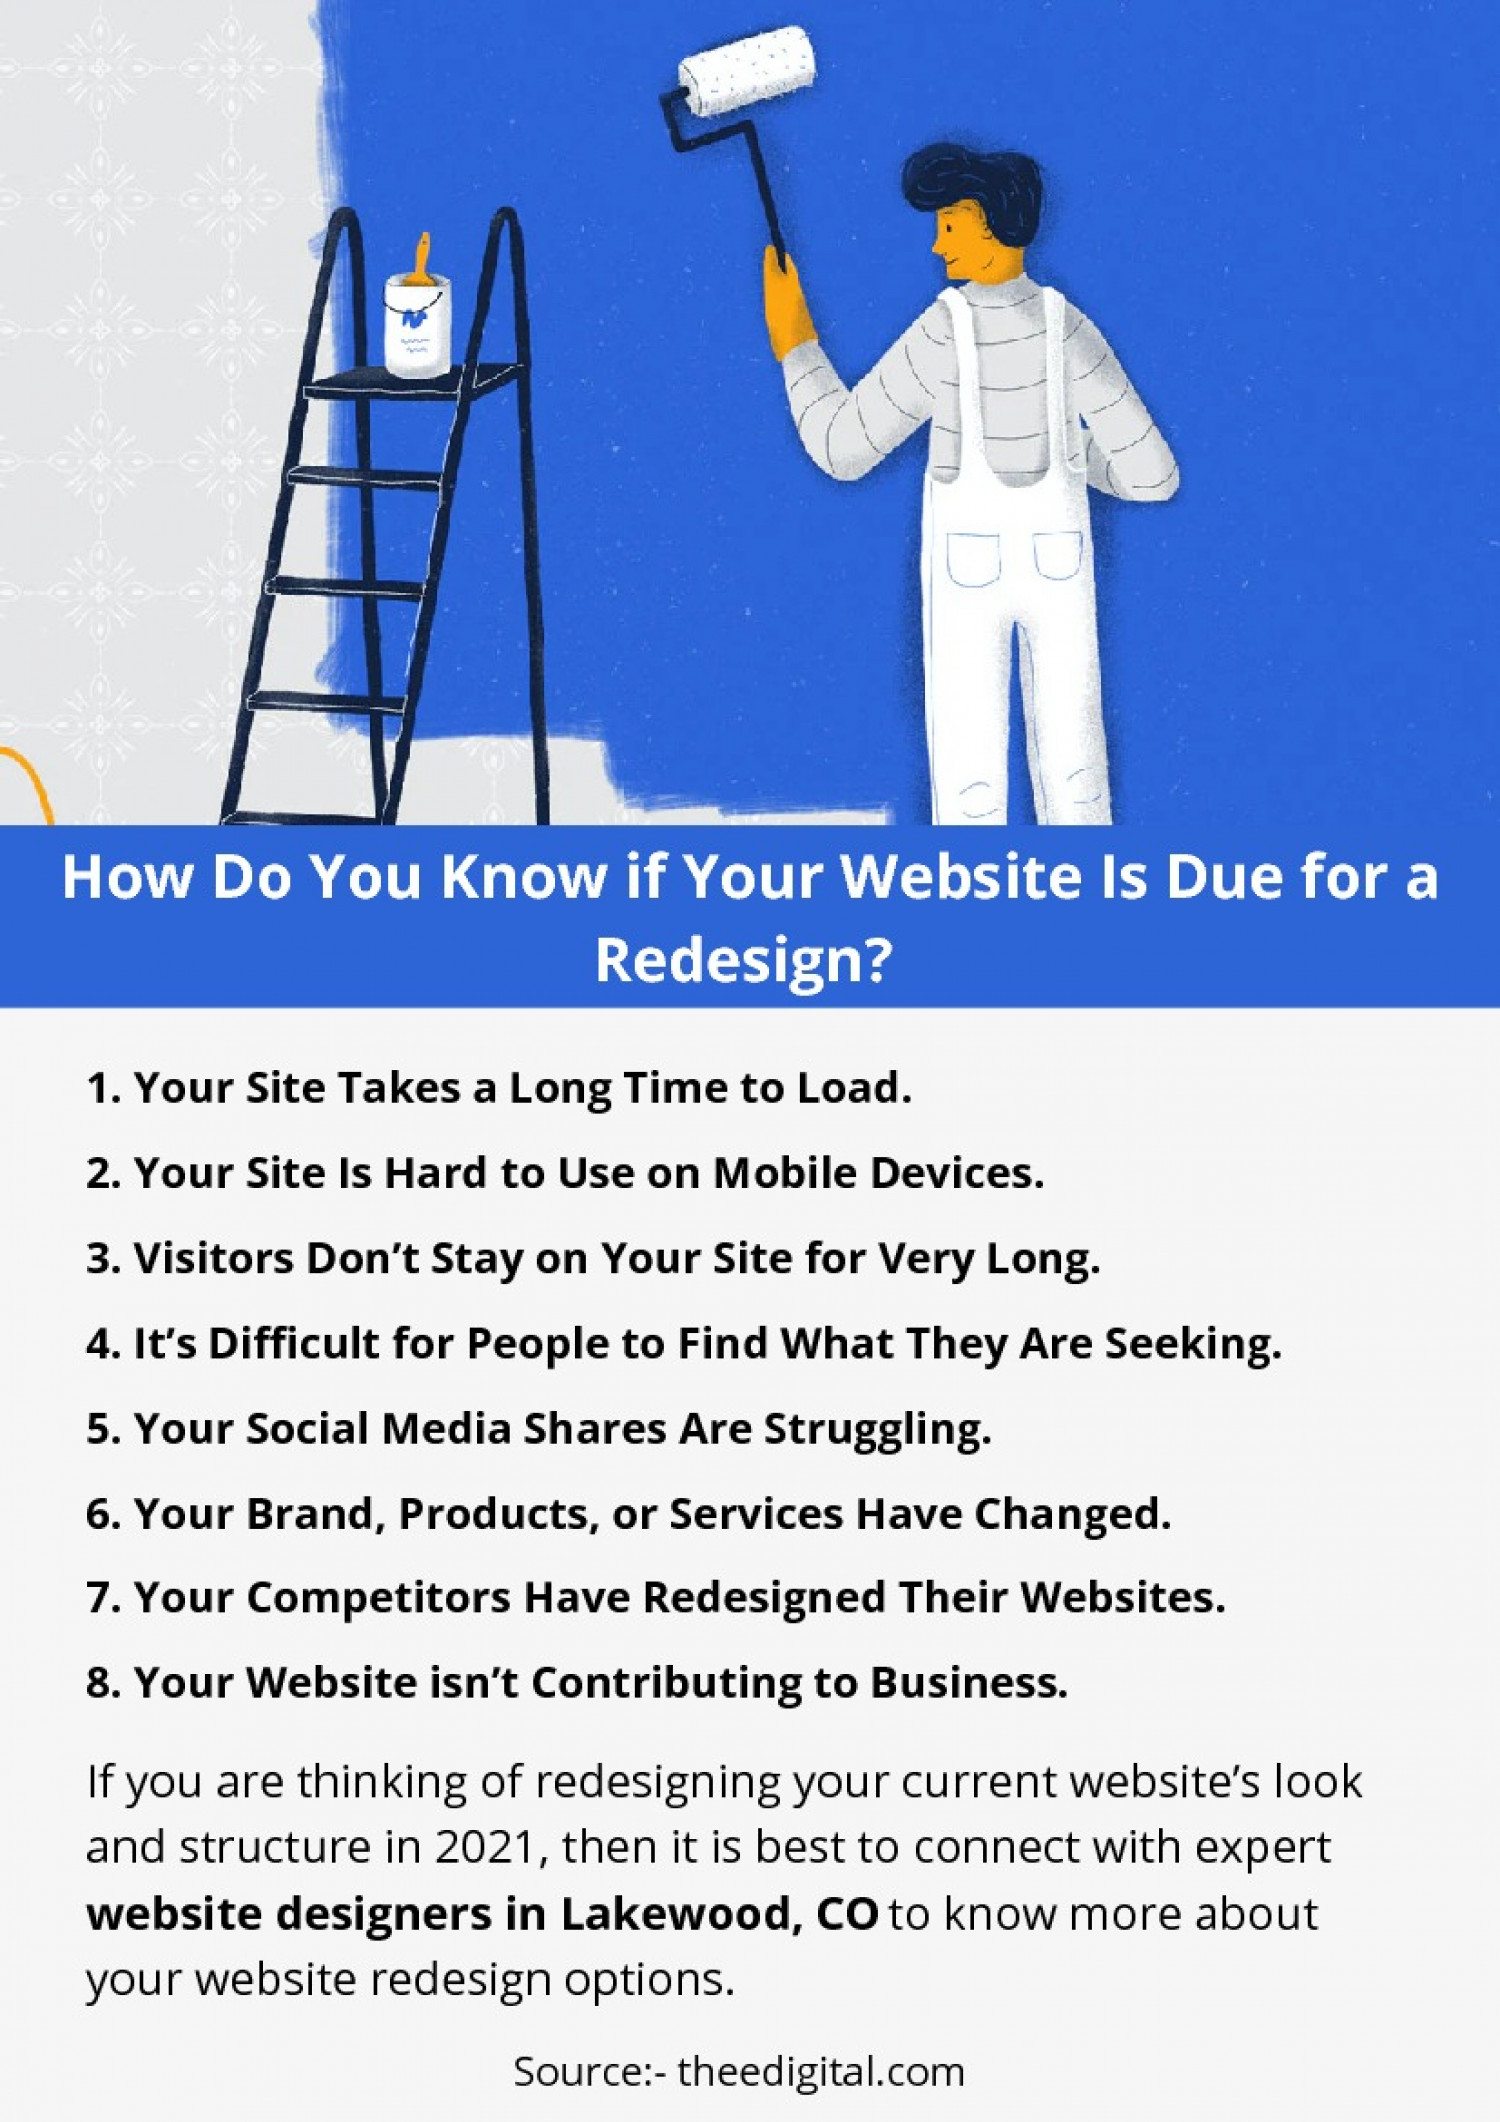 How Do You Know if Your Website Is Due for a Redesign?  Infographic